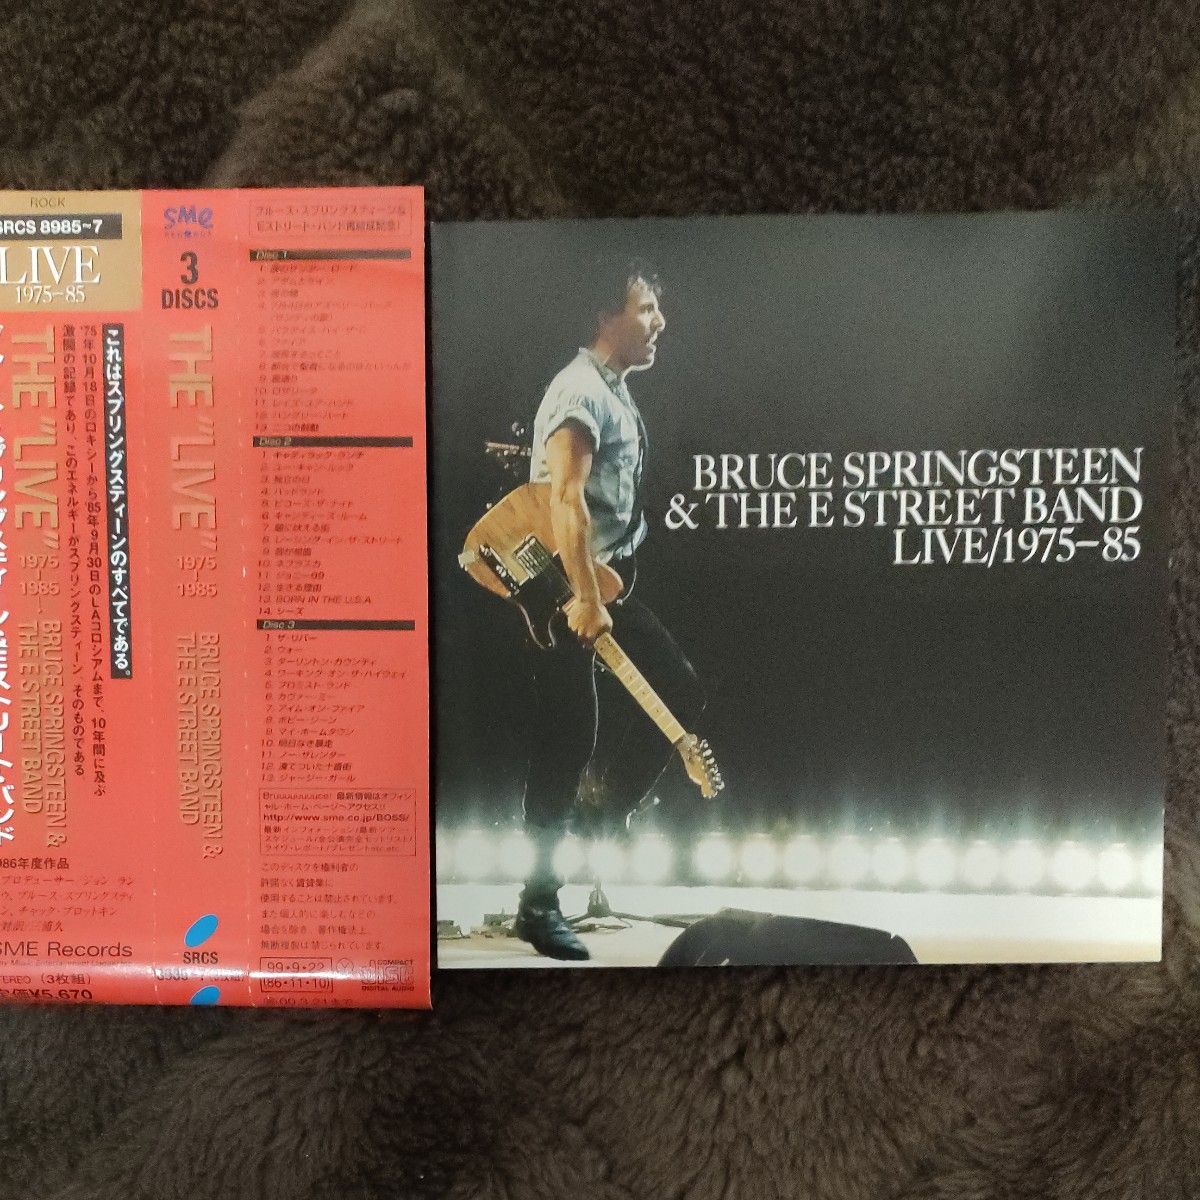 BRUCE SPRINGSTEEN and THE E STREET BAND  Live/1975~85 見本盤CD3枚組